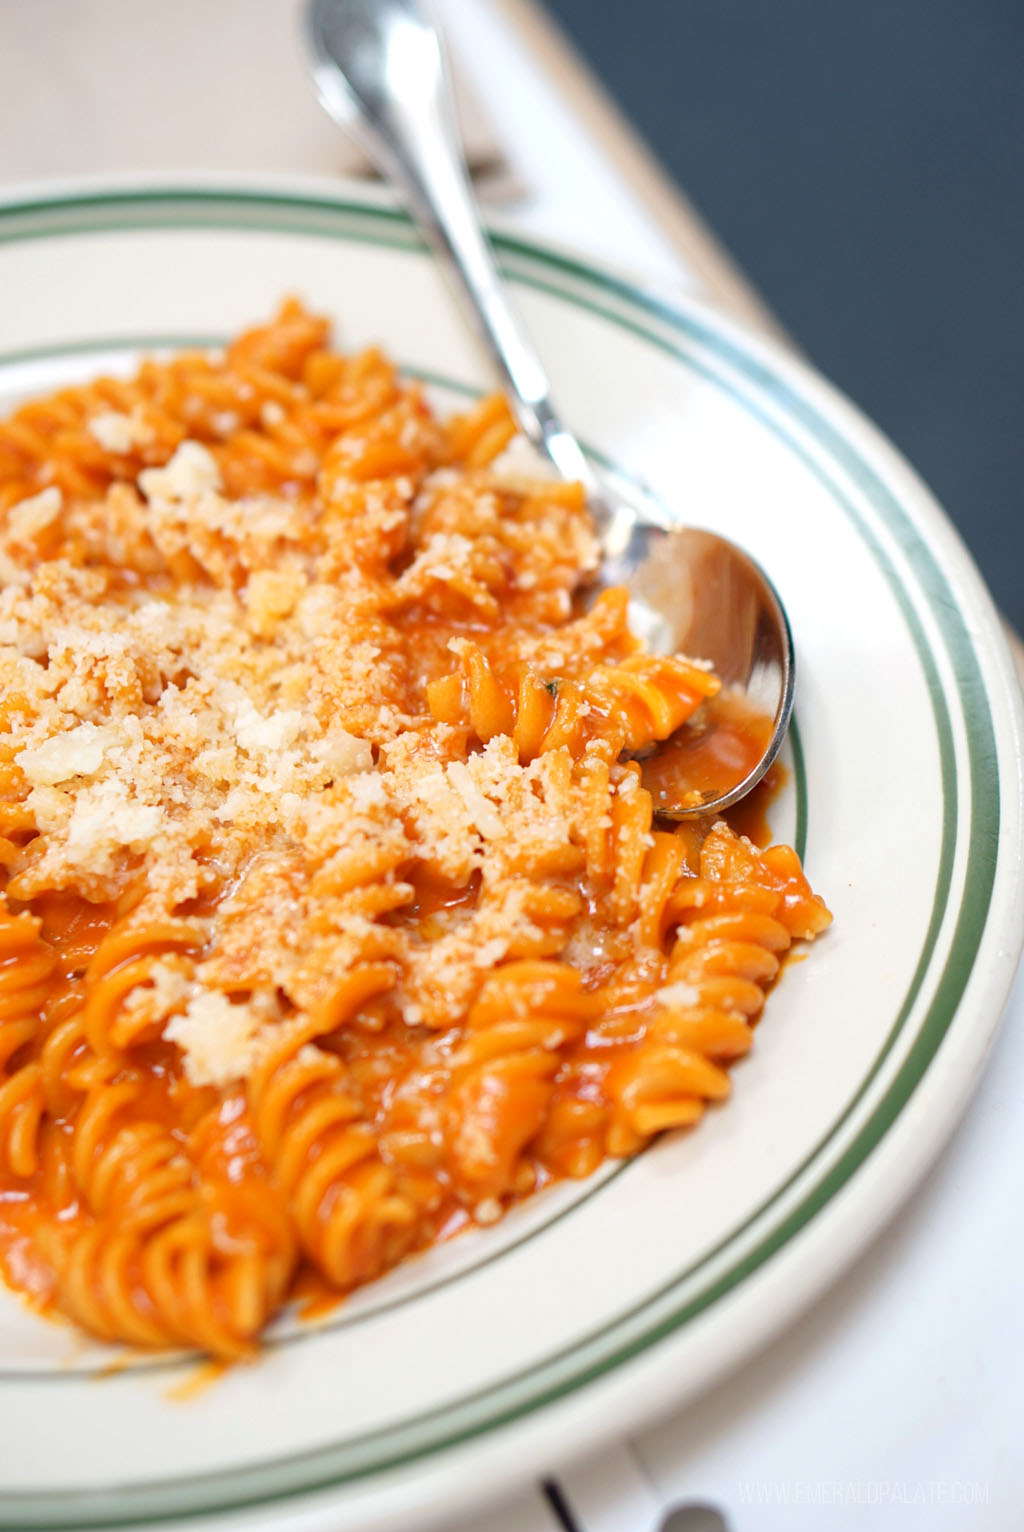 Fusilli pasta with vodka sauce and covered with cheese